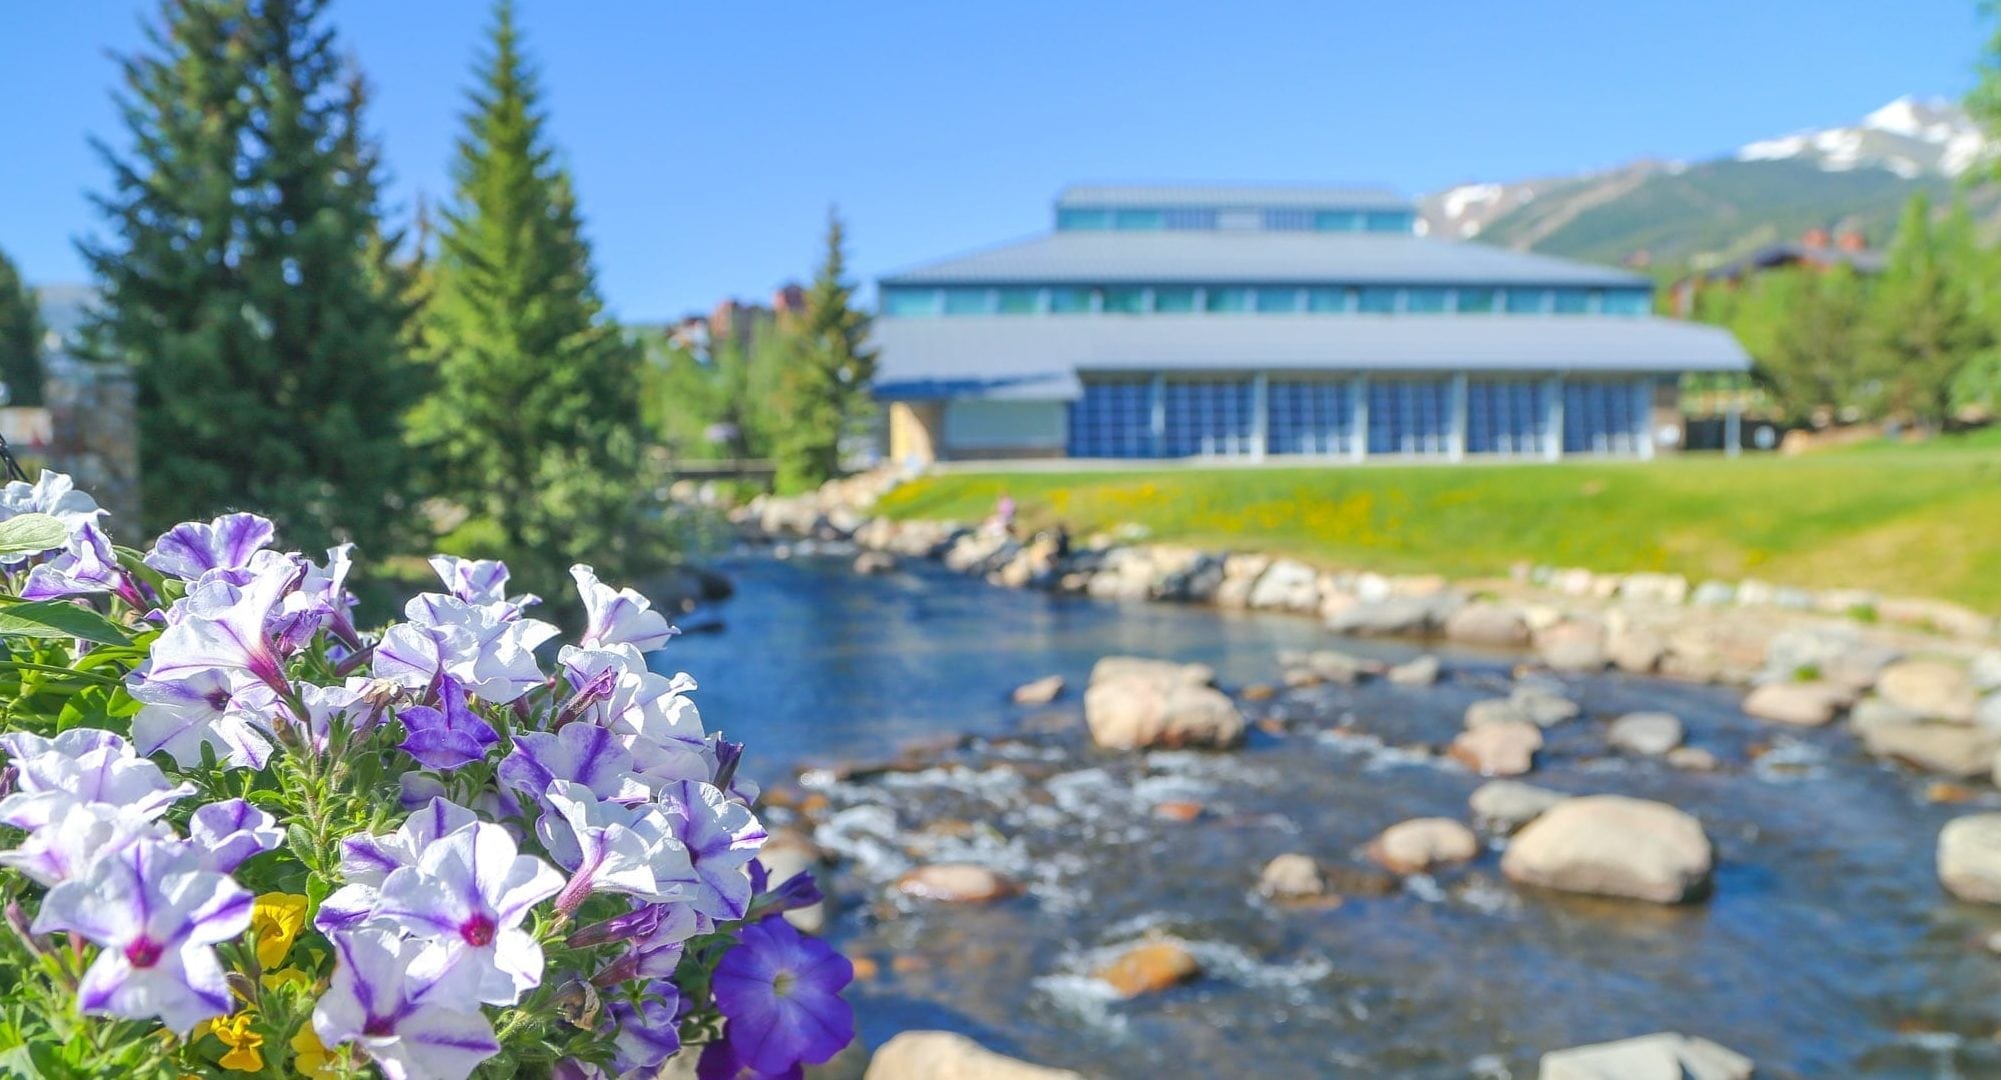 Flowers on Blue River Plaza in Breckenridge in the summertime.